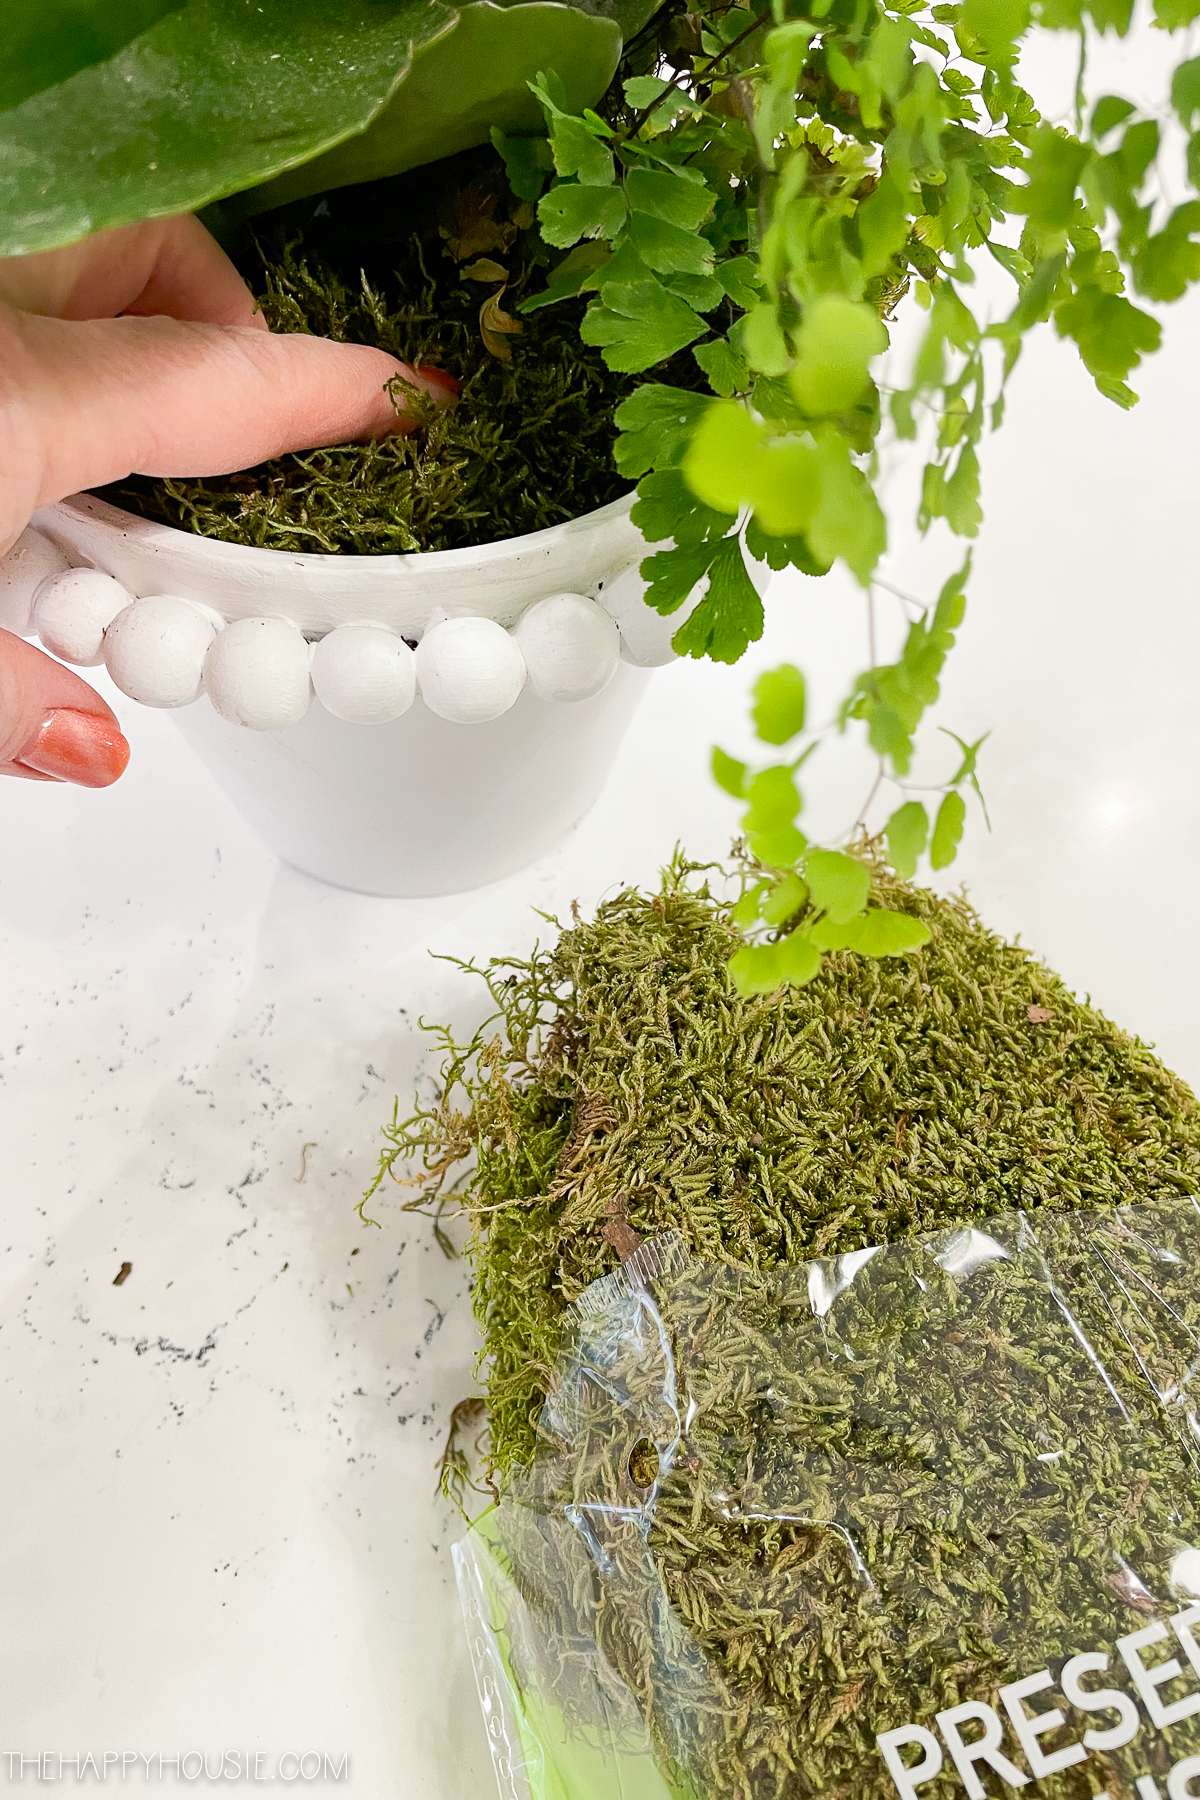 Adding moss to the pot.